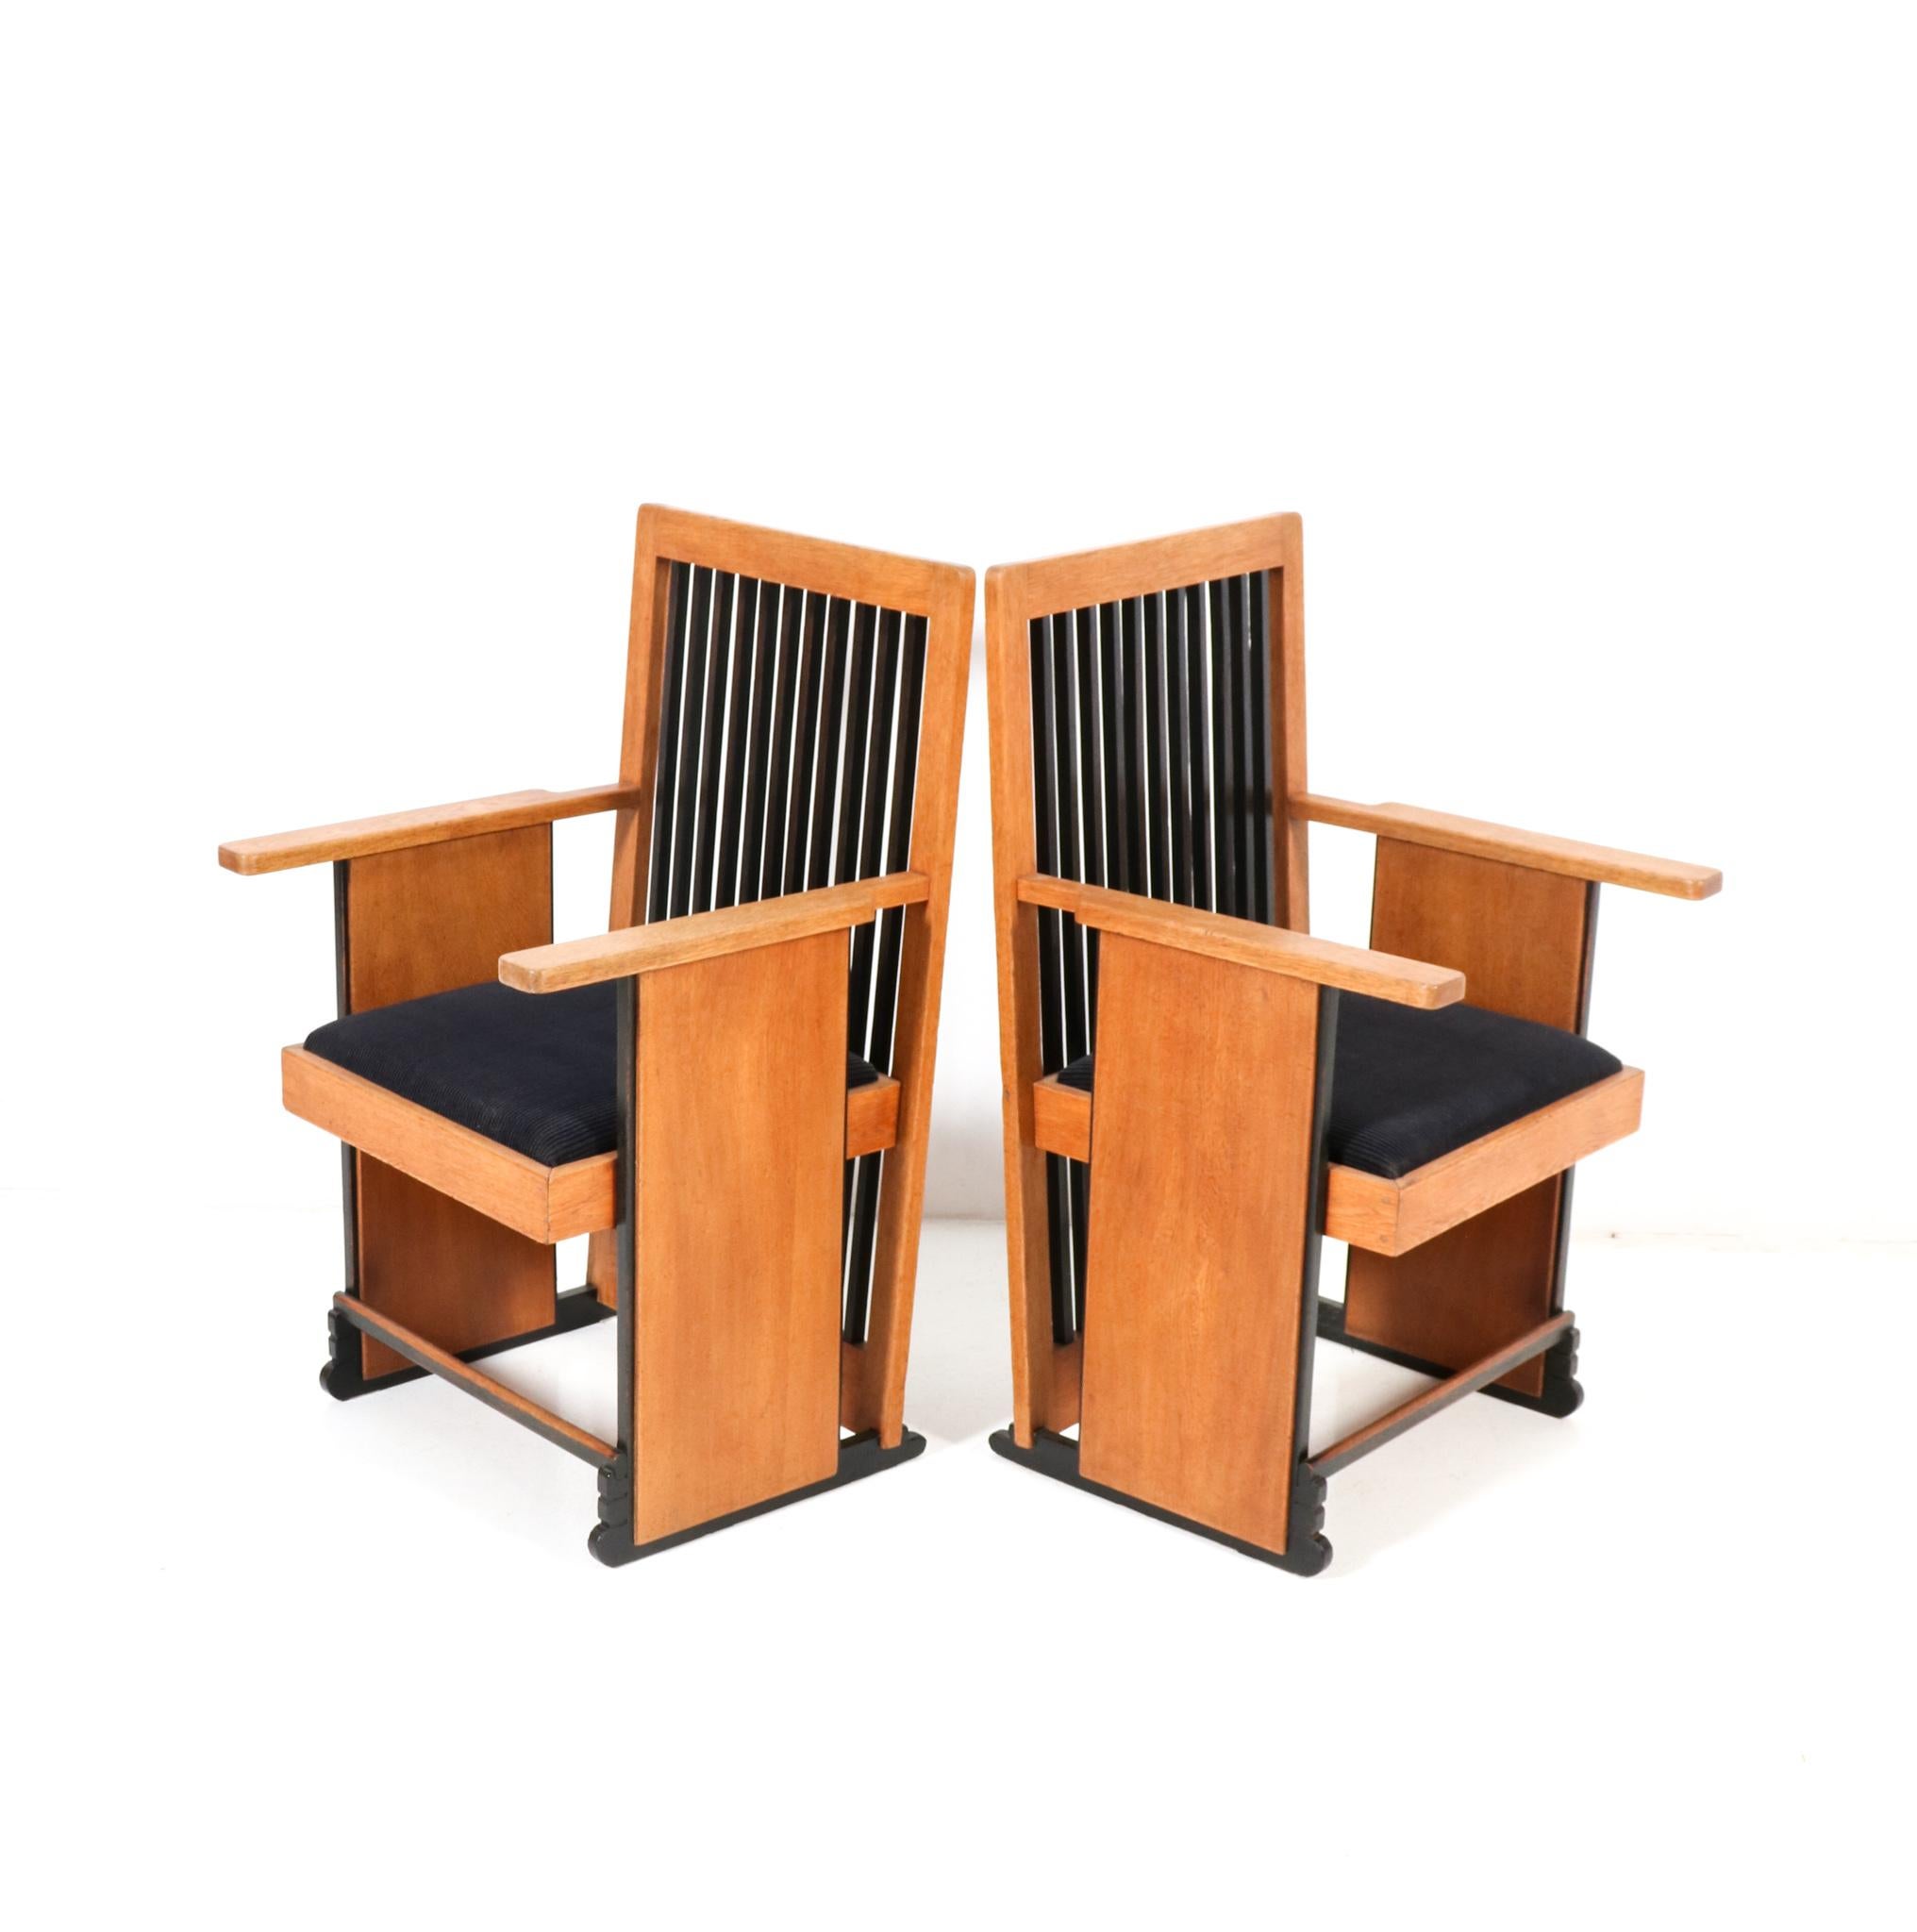  Oak Art Deco Modernist High Back Dining Room Chairs by Architect Caspers, 1920s For Sale 1